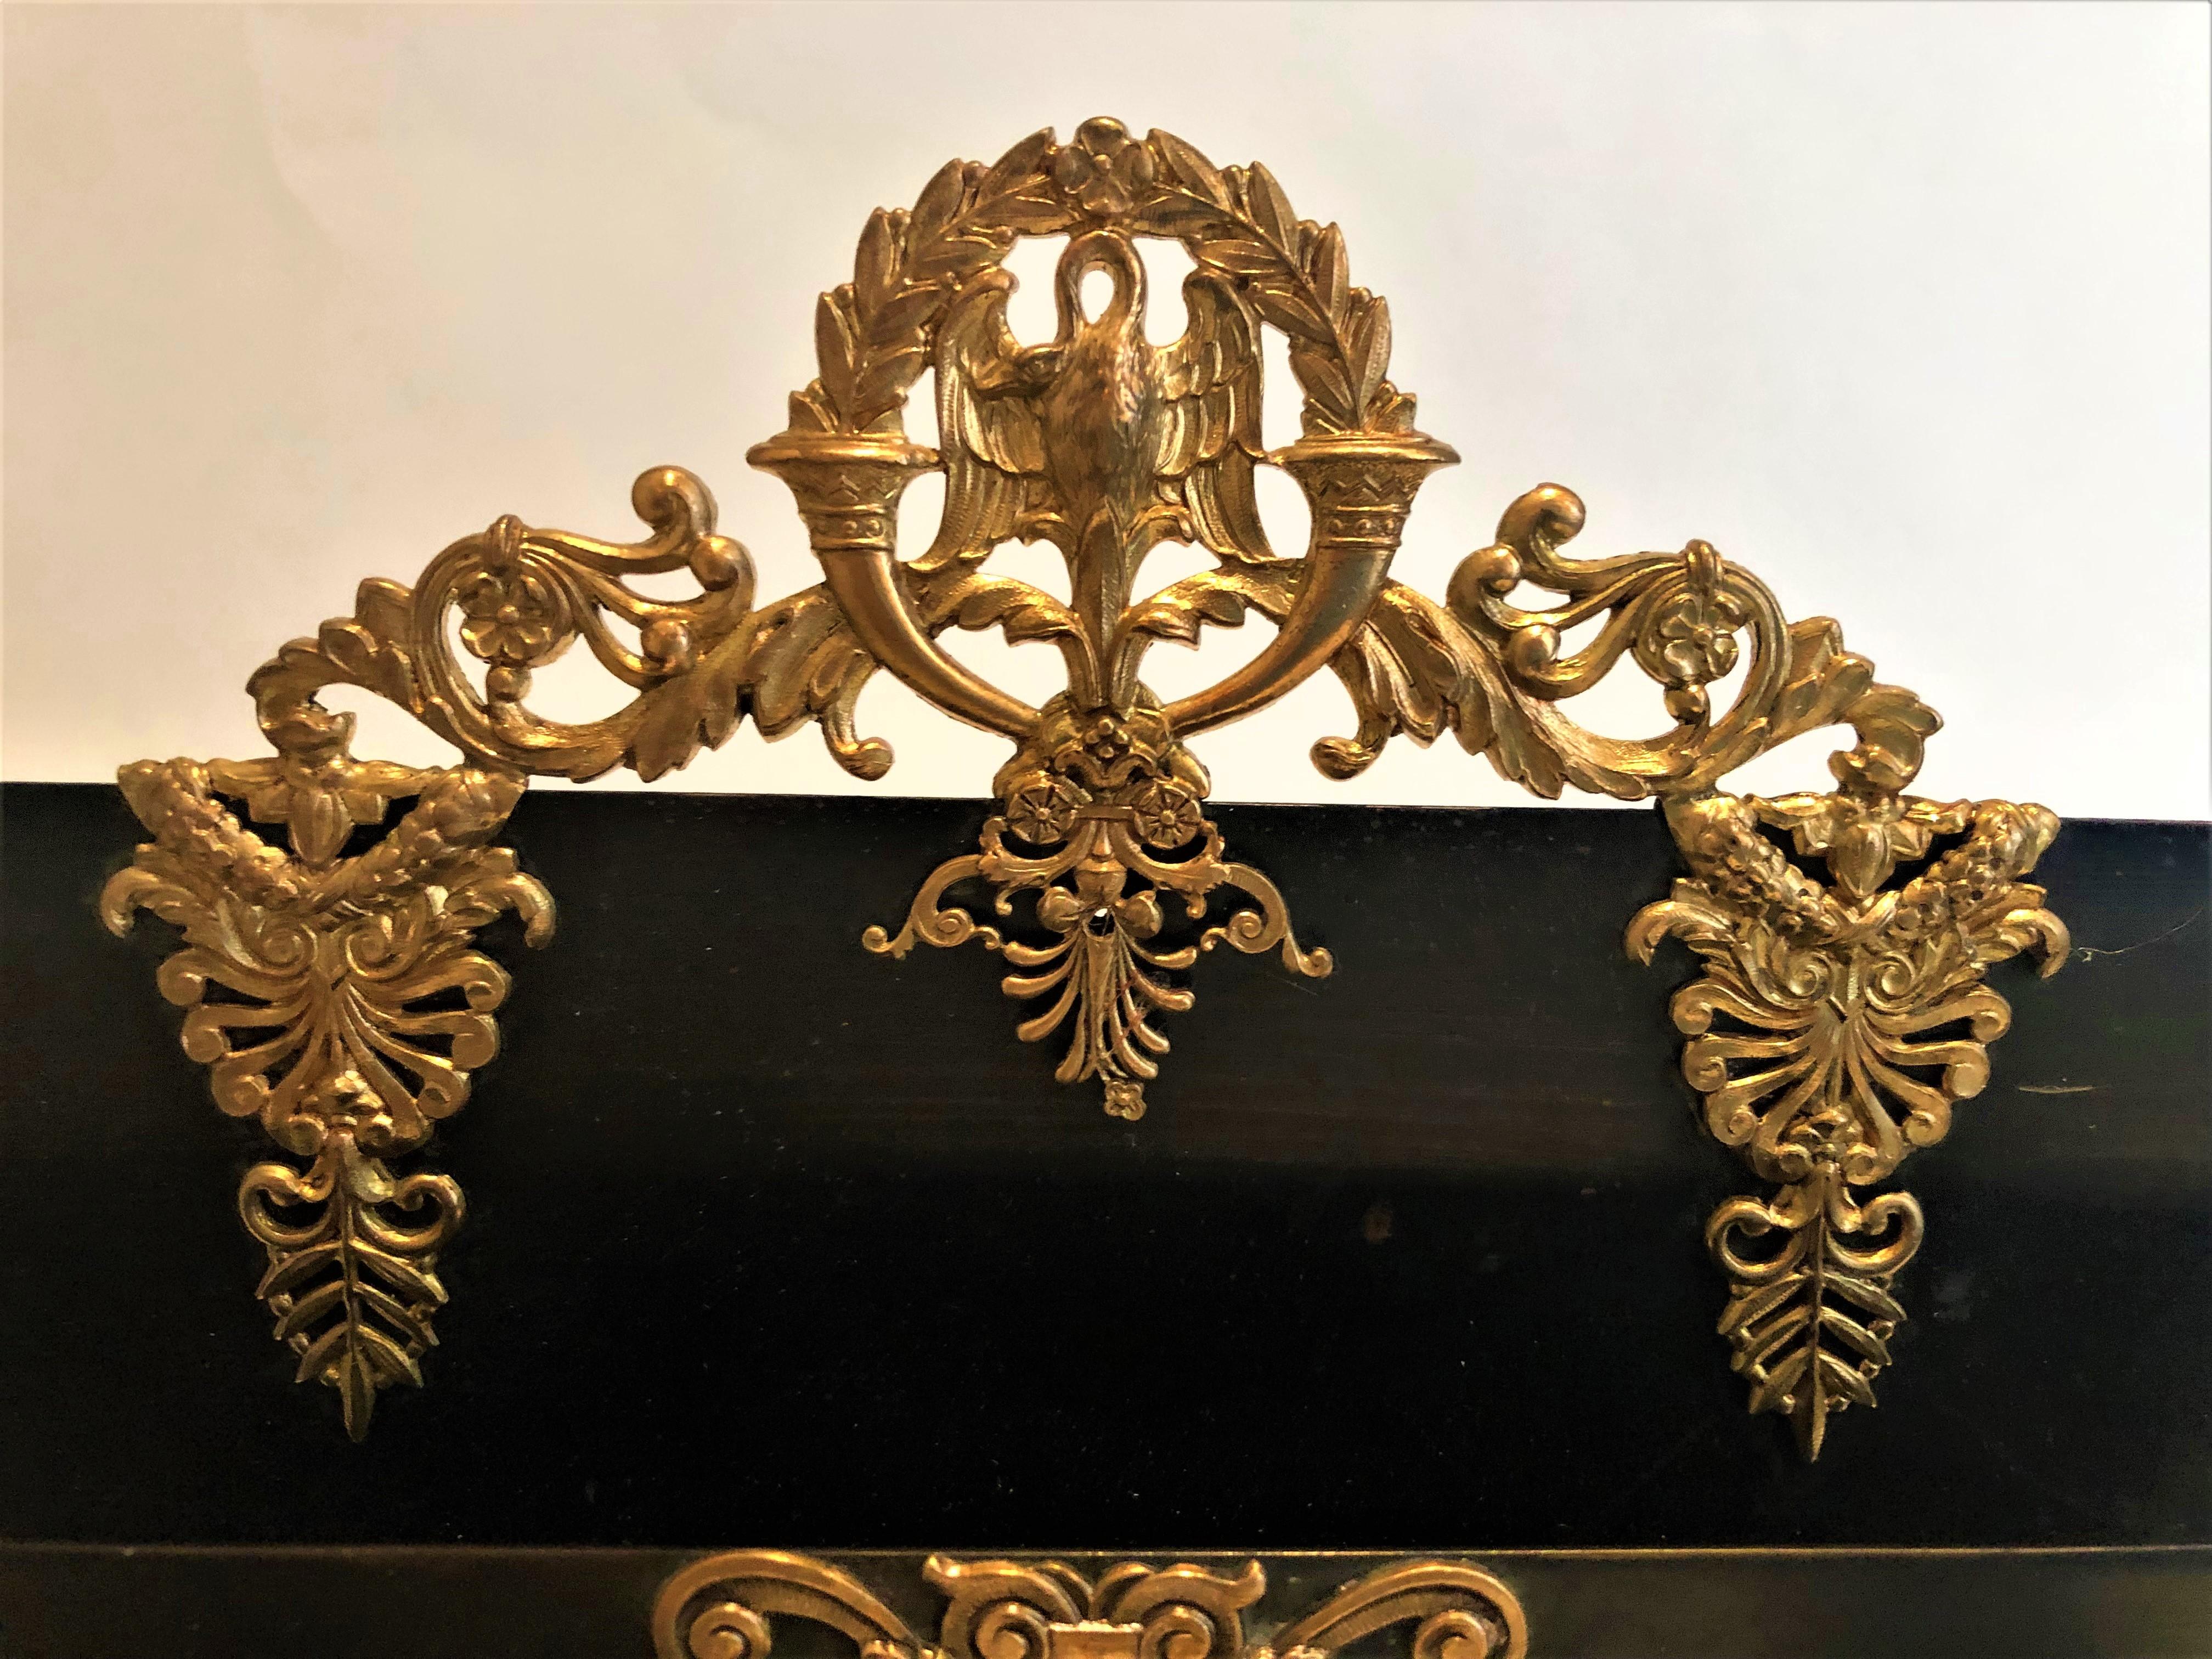 Exceptional 19th century French Empire desk letter holder with gilt bronze. In very good original conditions. Perfect for any entrance console table or for any desk.
Ormolu finely decorated papers / letters holder.